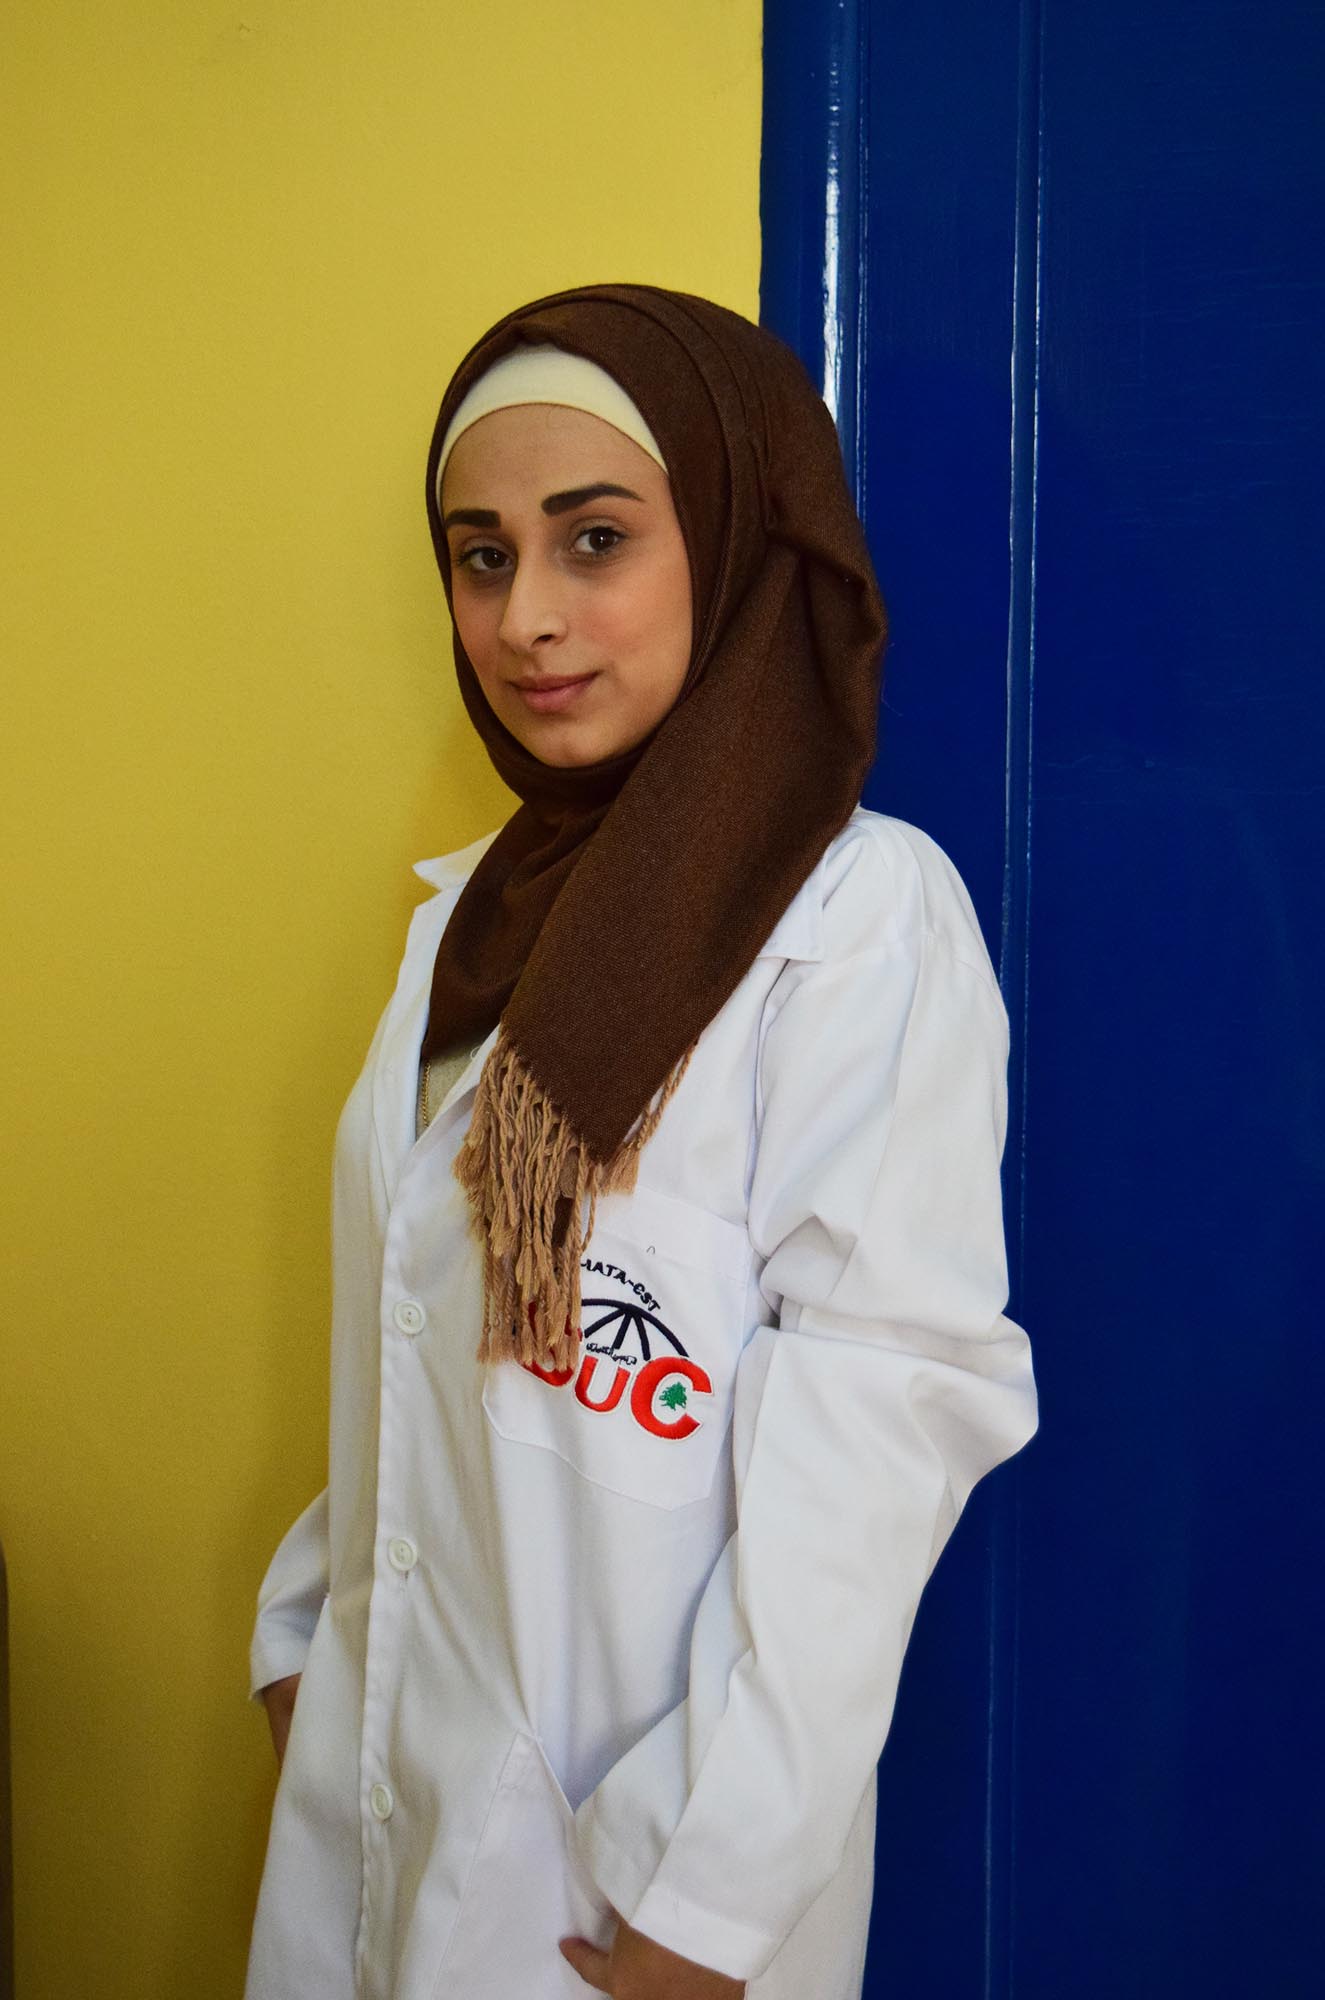 Rayan is a Syrian refugee of Palestinian descent and a recipient of an Anera scholarship.